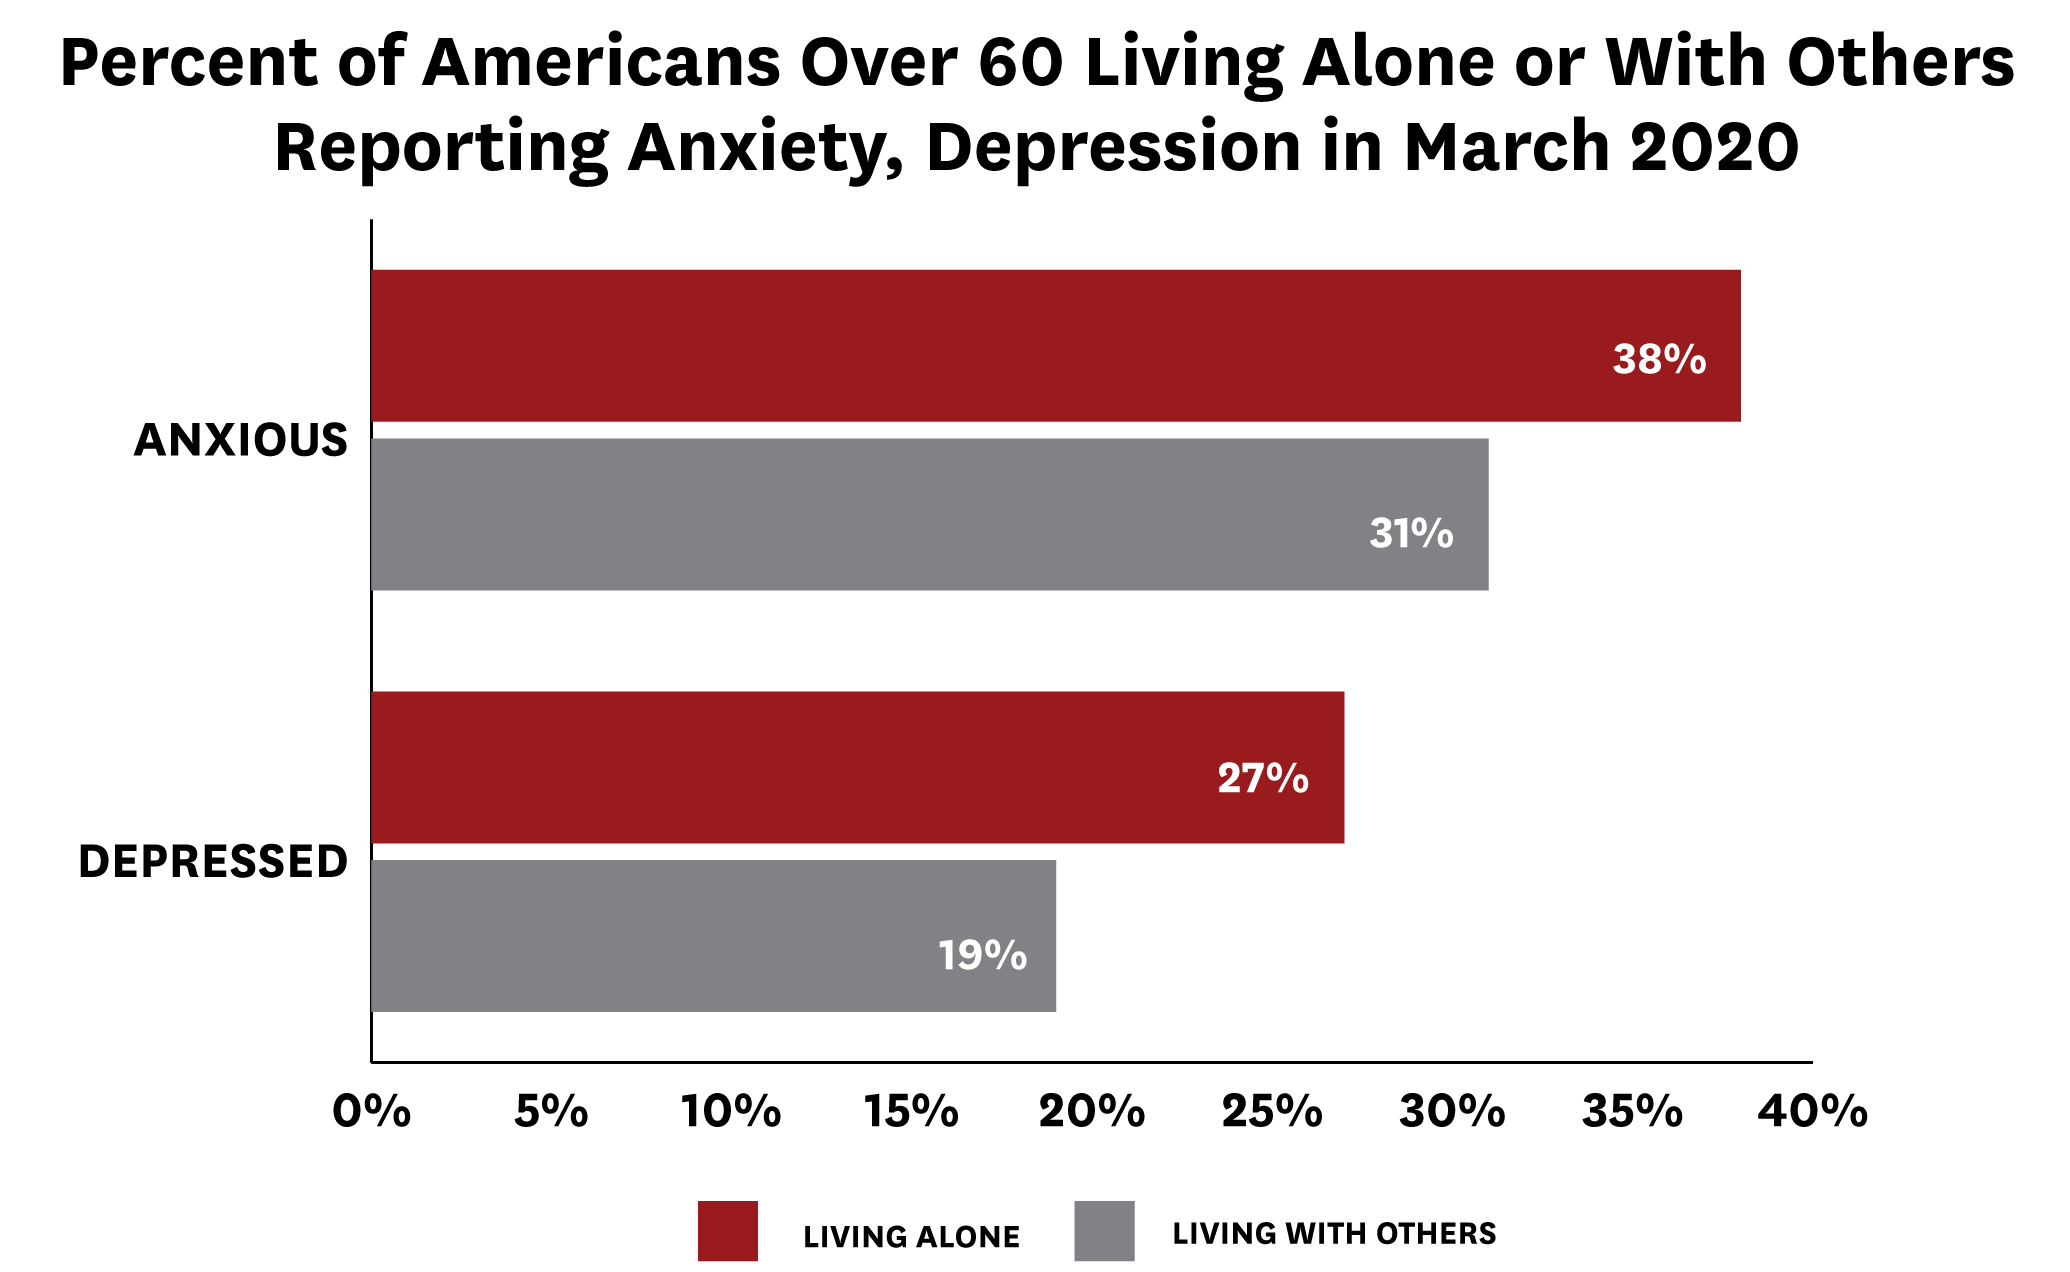 Percent of Americans Living Alone or With Others Reporting Anxiety, Depression